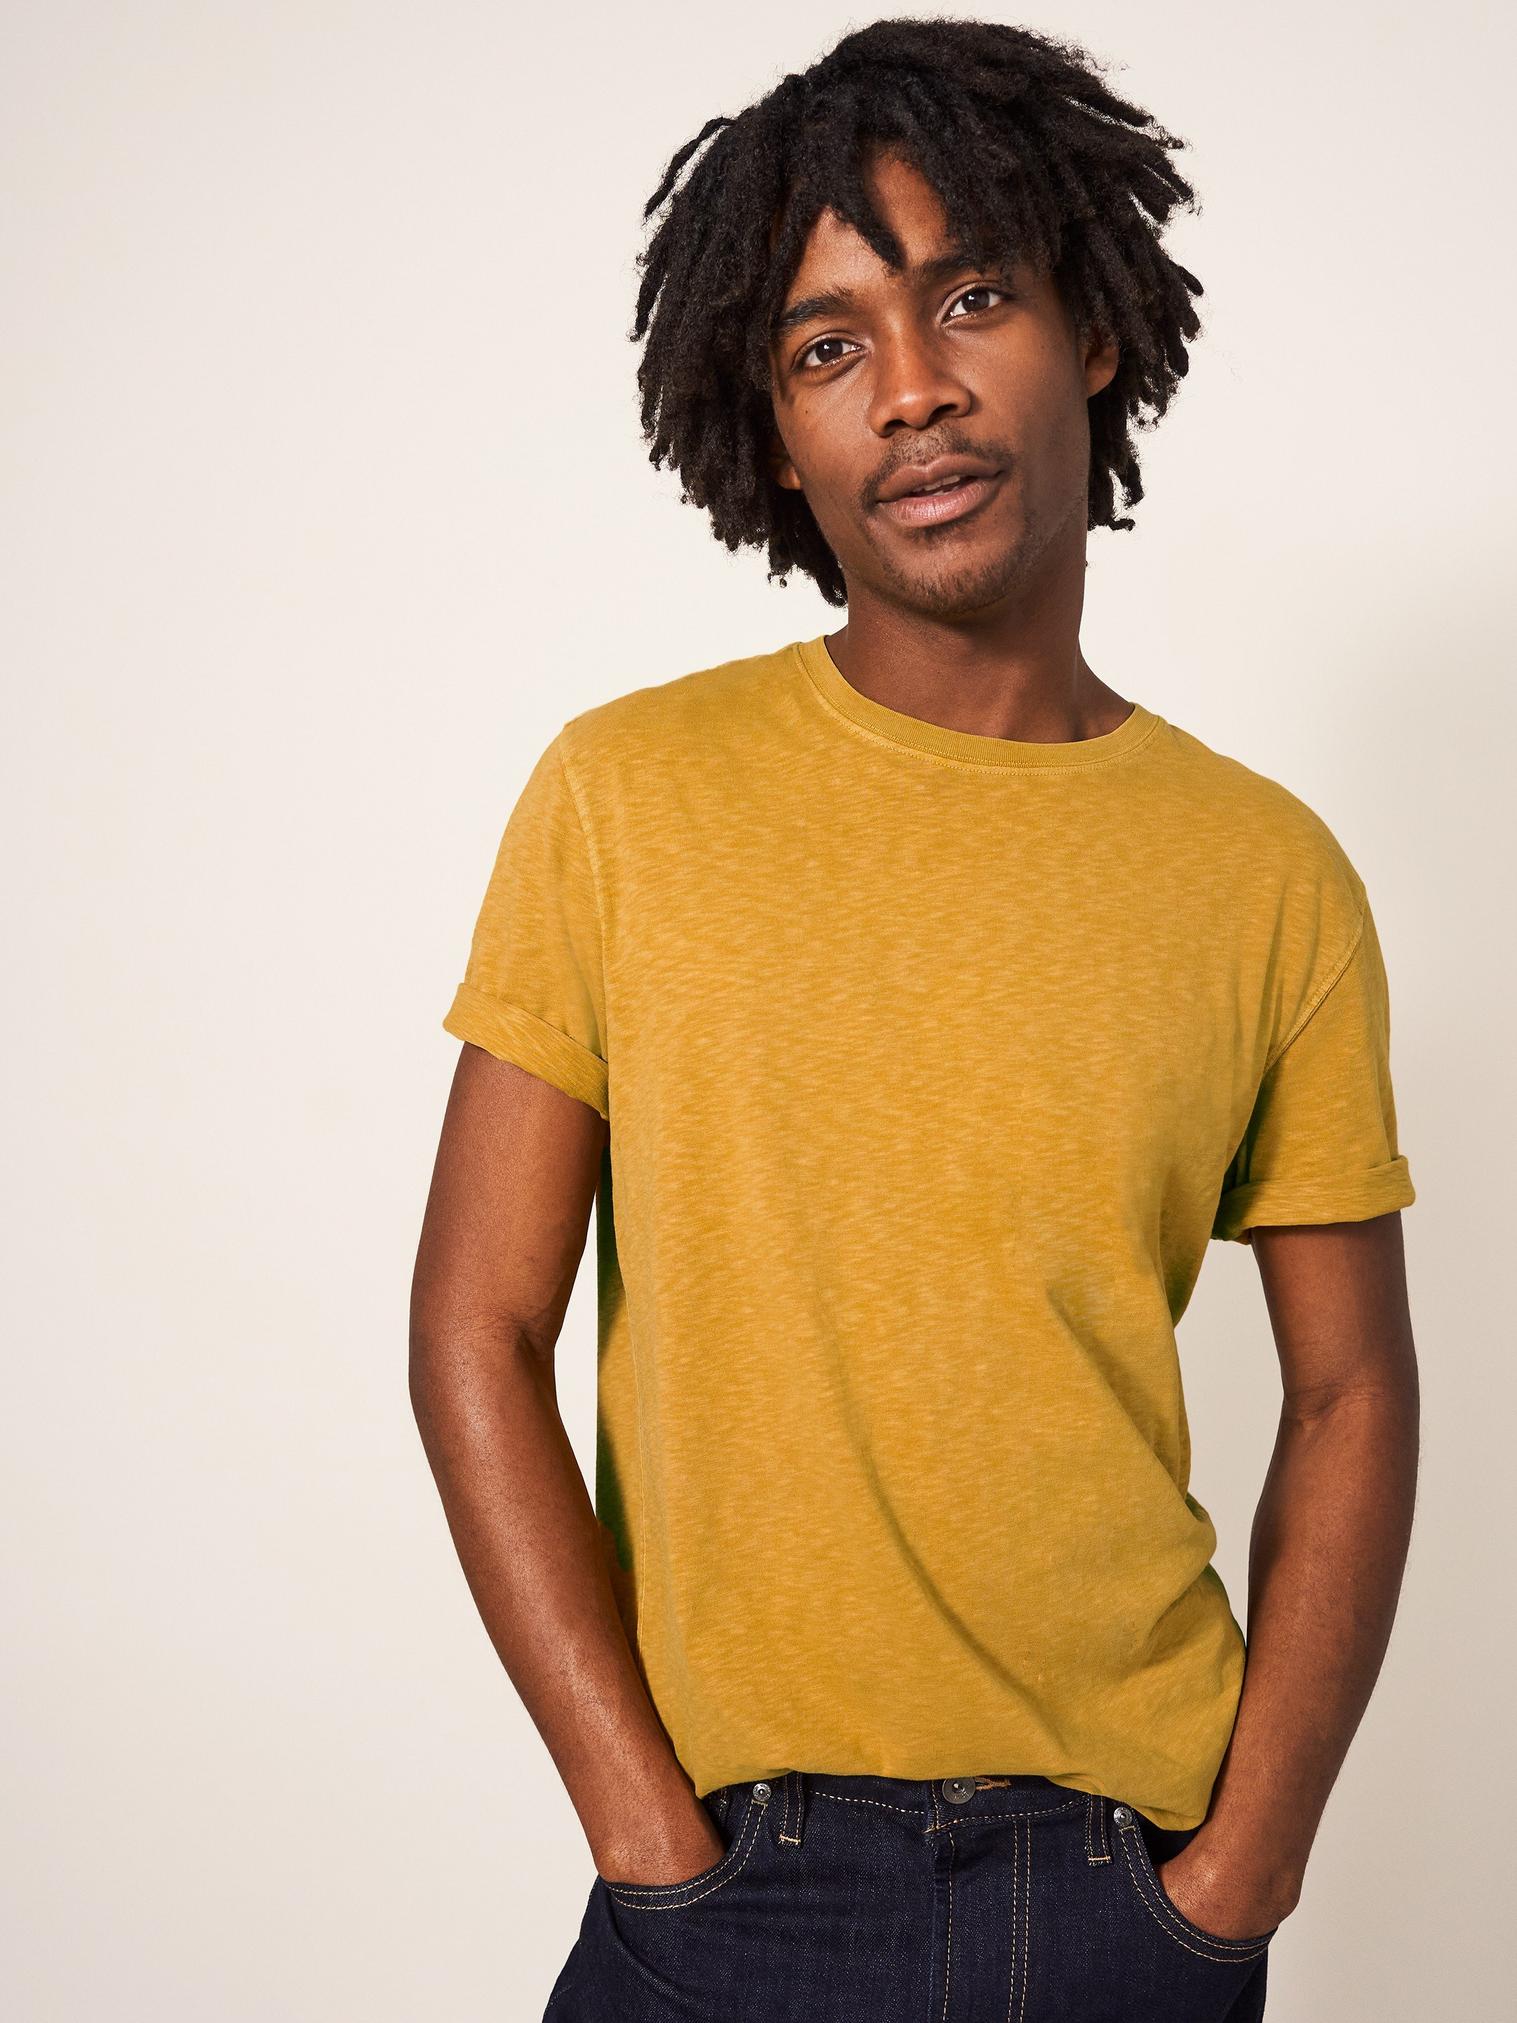 Abersoch Short Sleeve Tee in DP YELLOW - LIFESTYLE